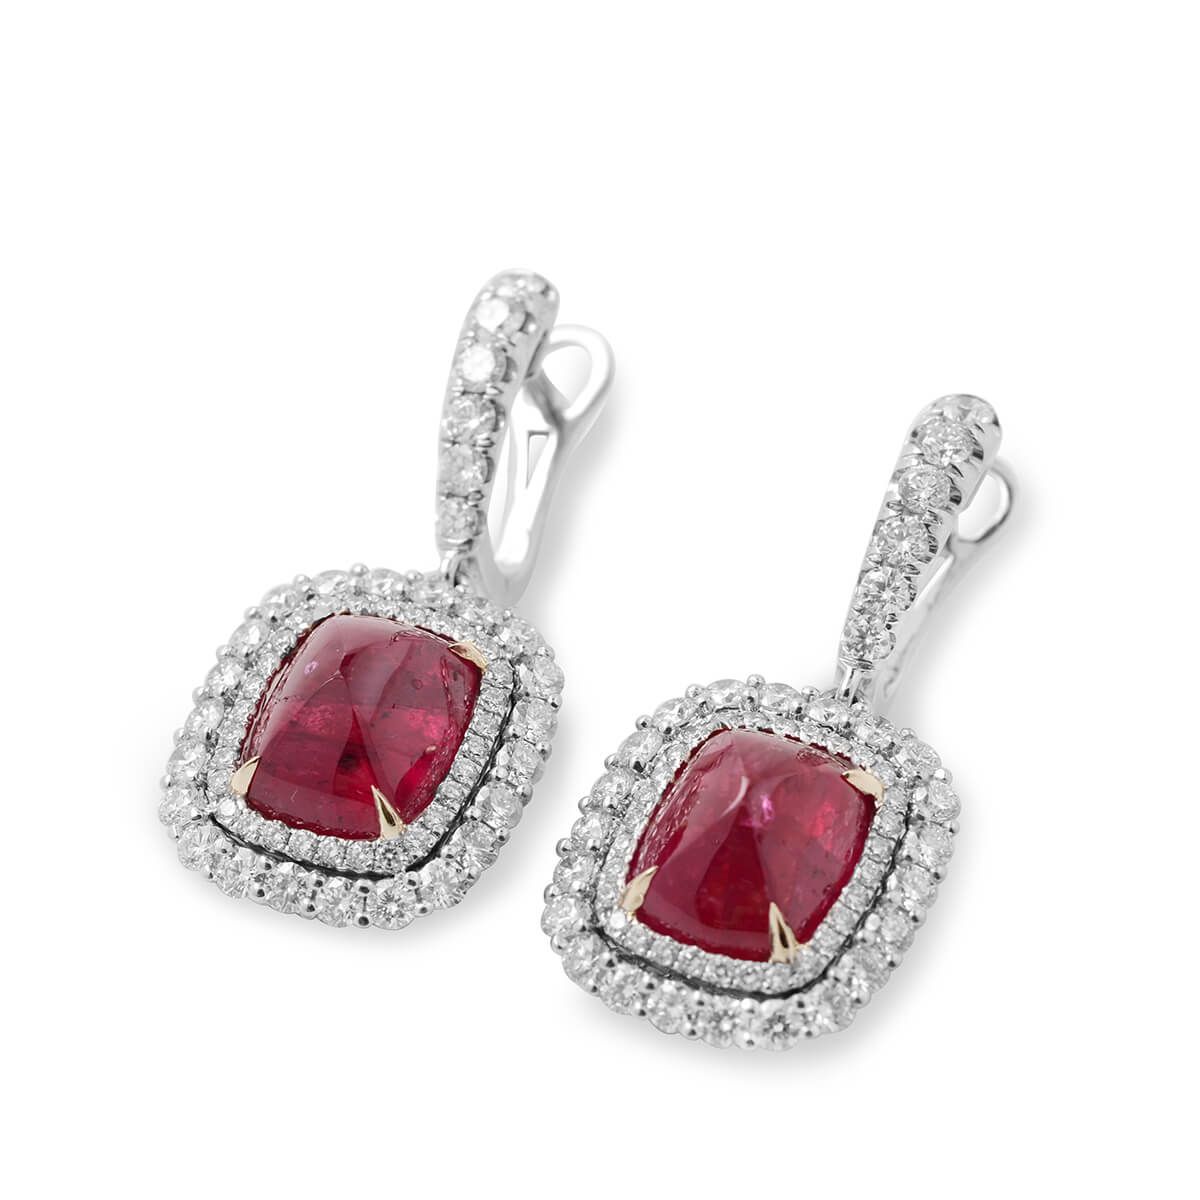 Natural Red Tanzania Ruby Earrings, 12.11 Ct. (14.84 Ct. TW), GRS Certified, GRS2010-112293, Unheated